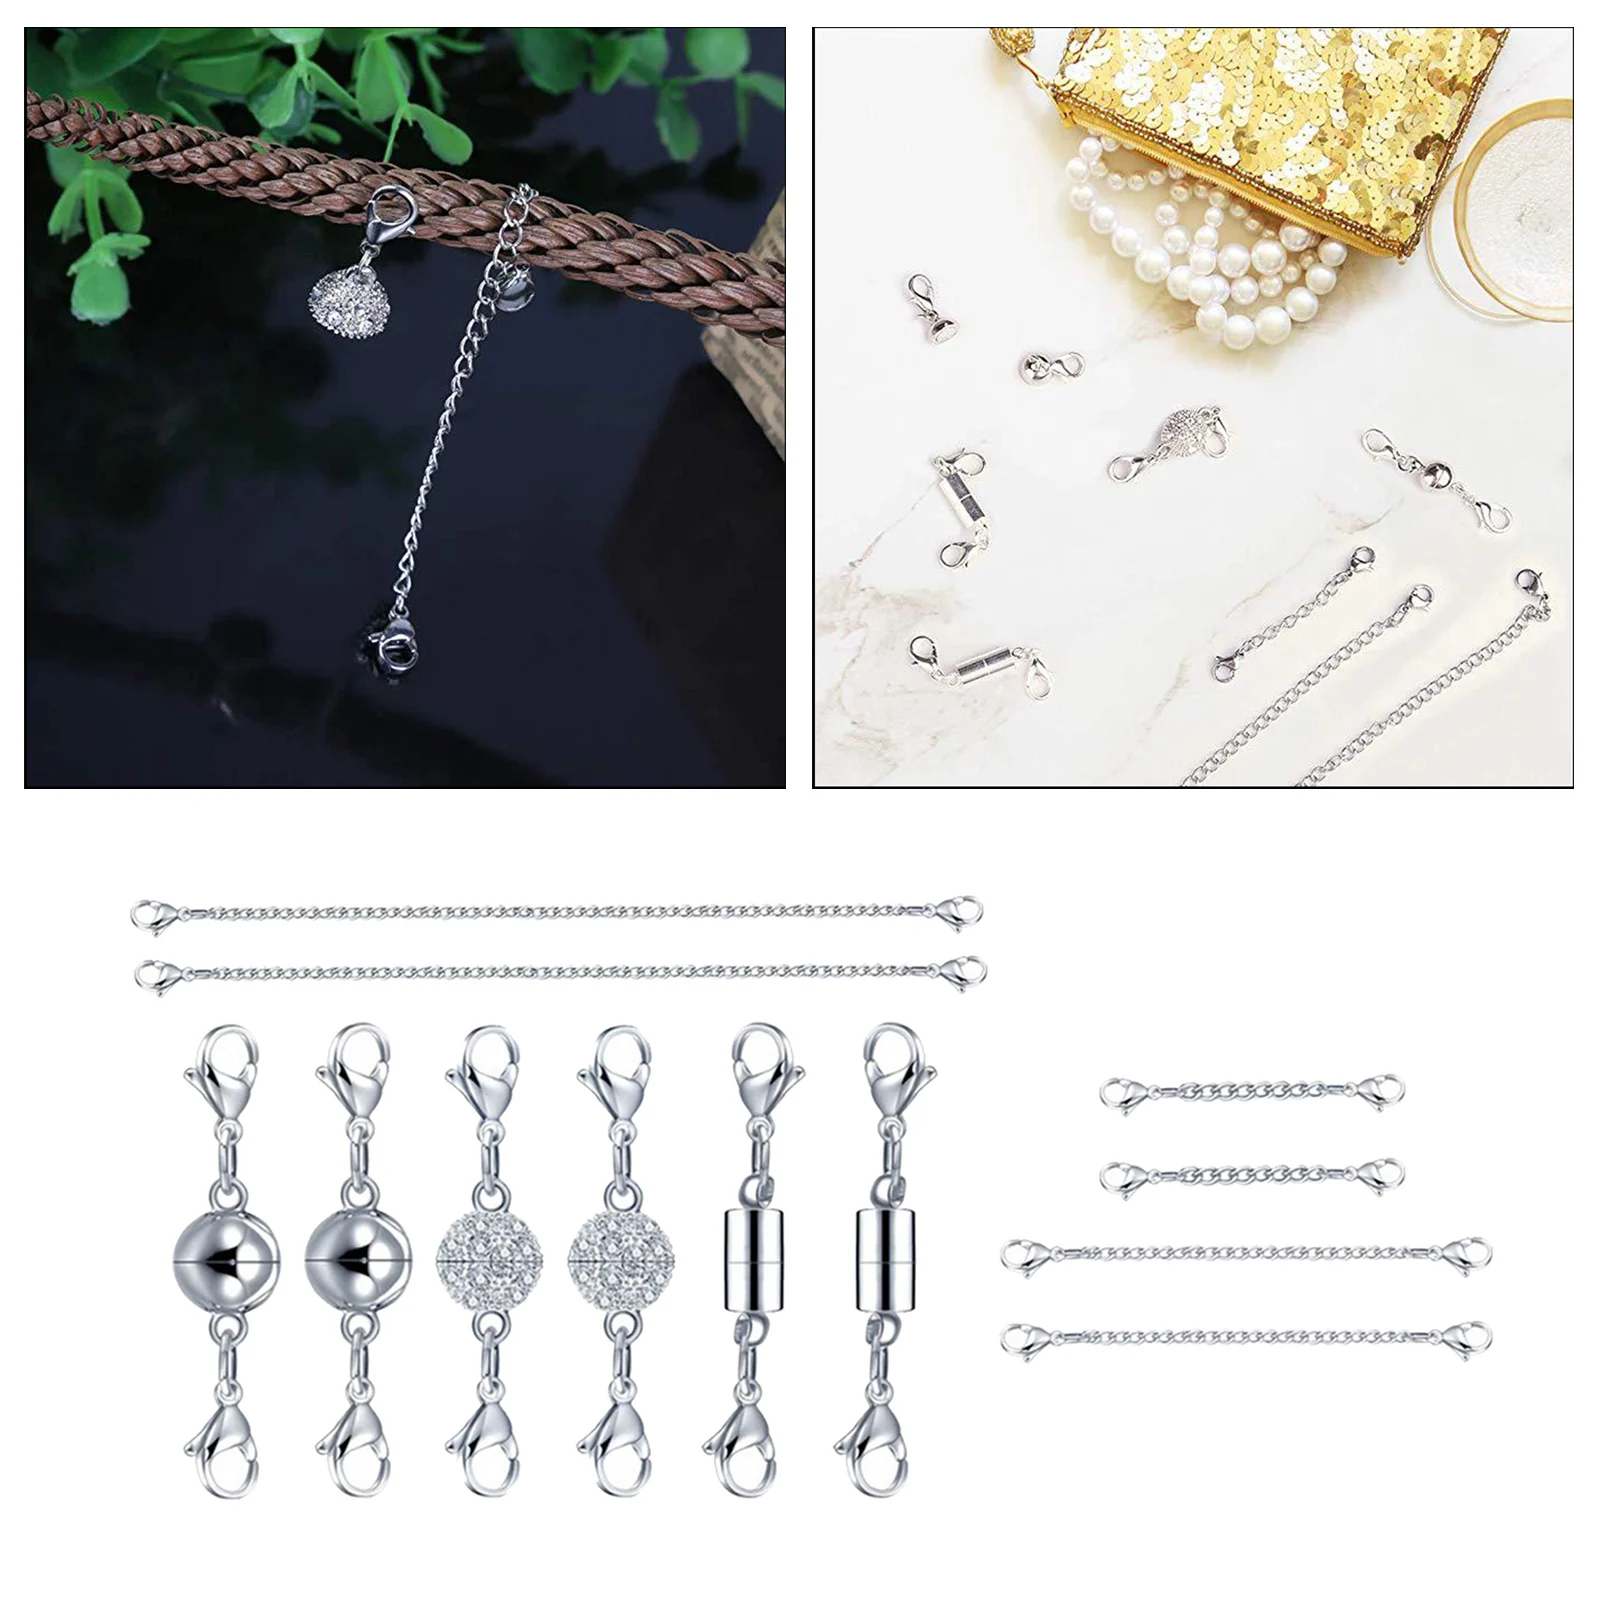 12x Necklace Magnetic Clasp Chain Extenders Connector Jewelry Lock Converter